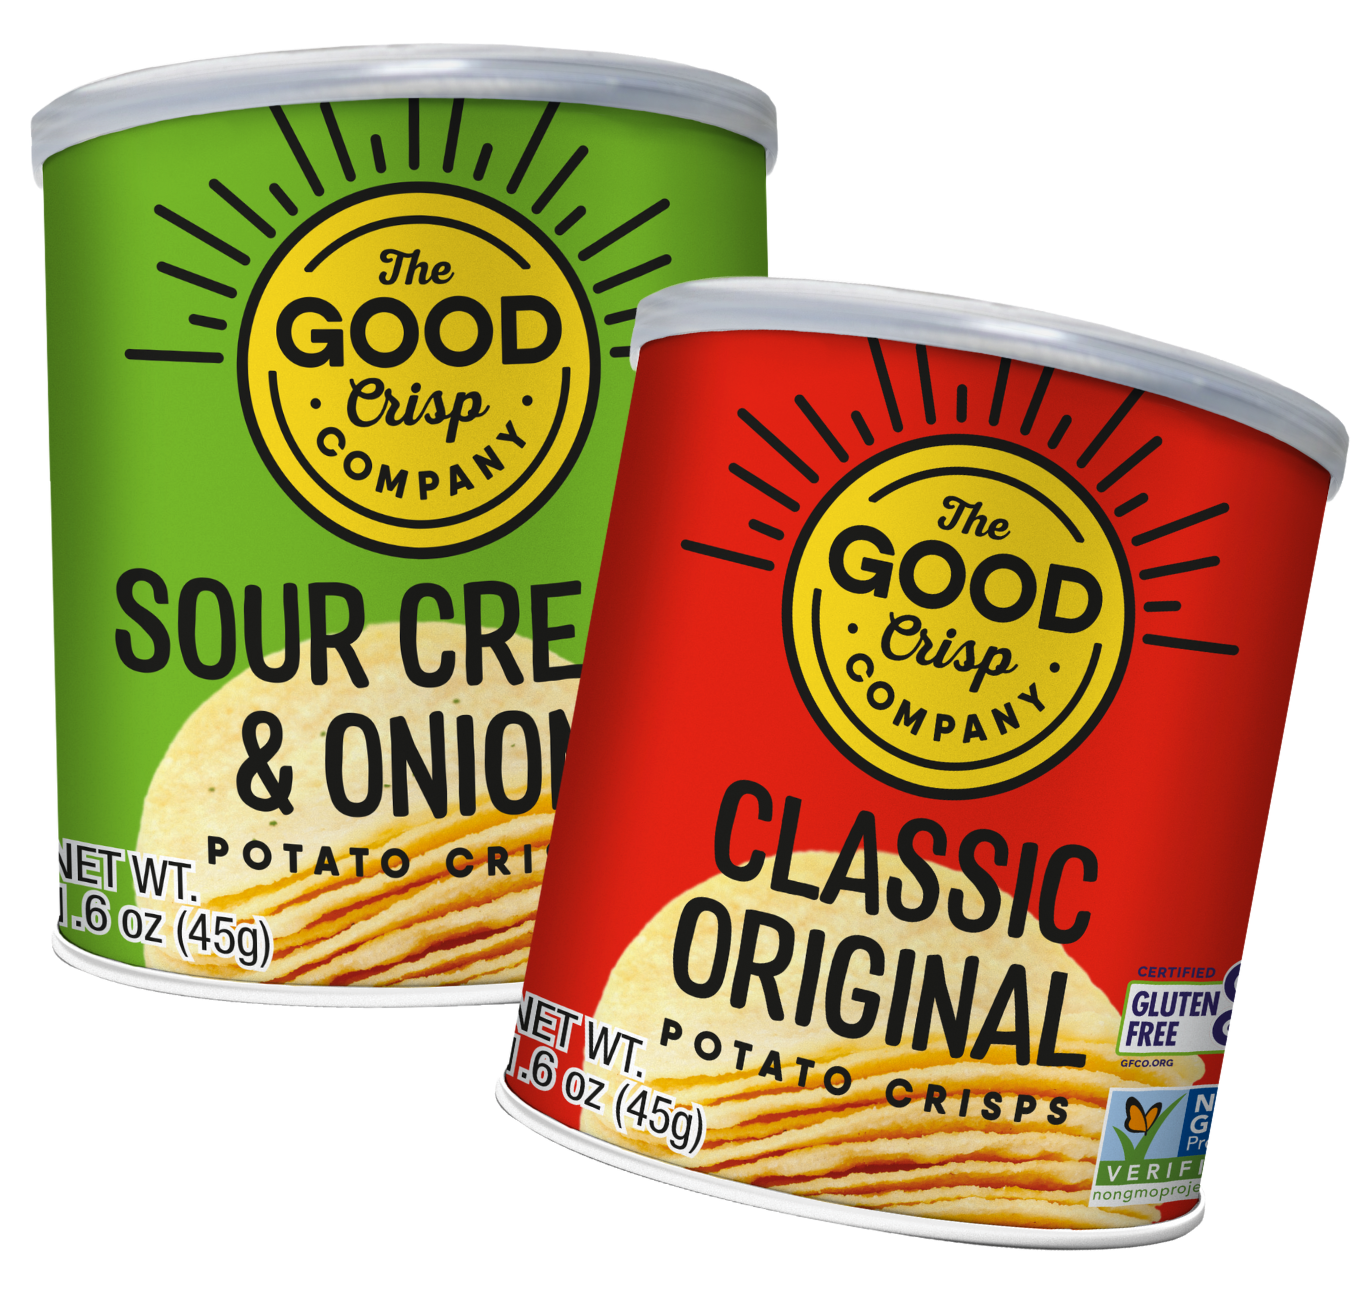 image of one can of the good crisp company original flavor chips in 1.6oz can and one can of the good crisp company sour cream and onion flavor chips in 1.6oz can